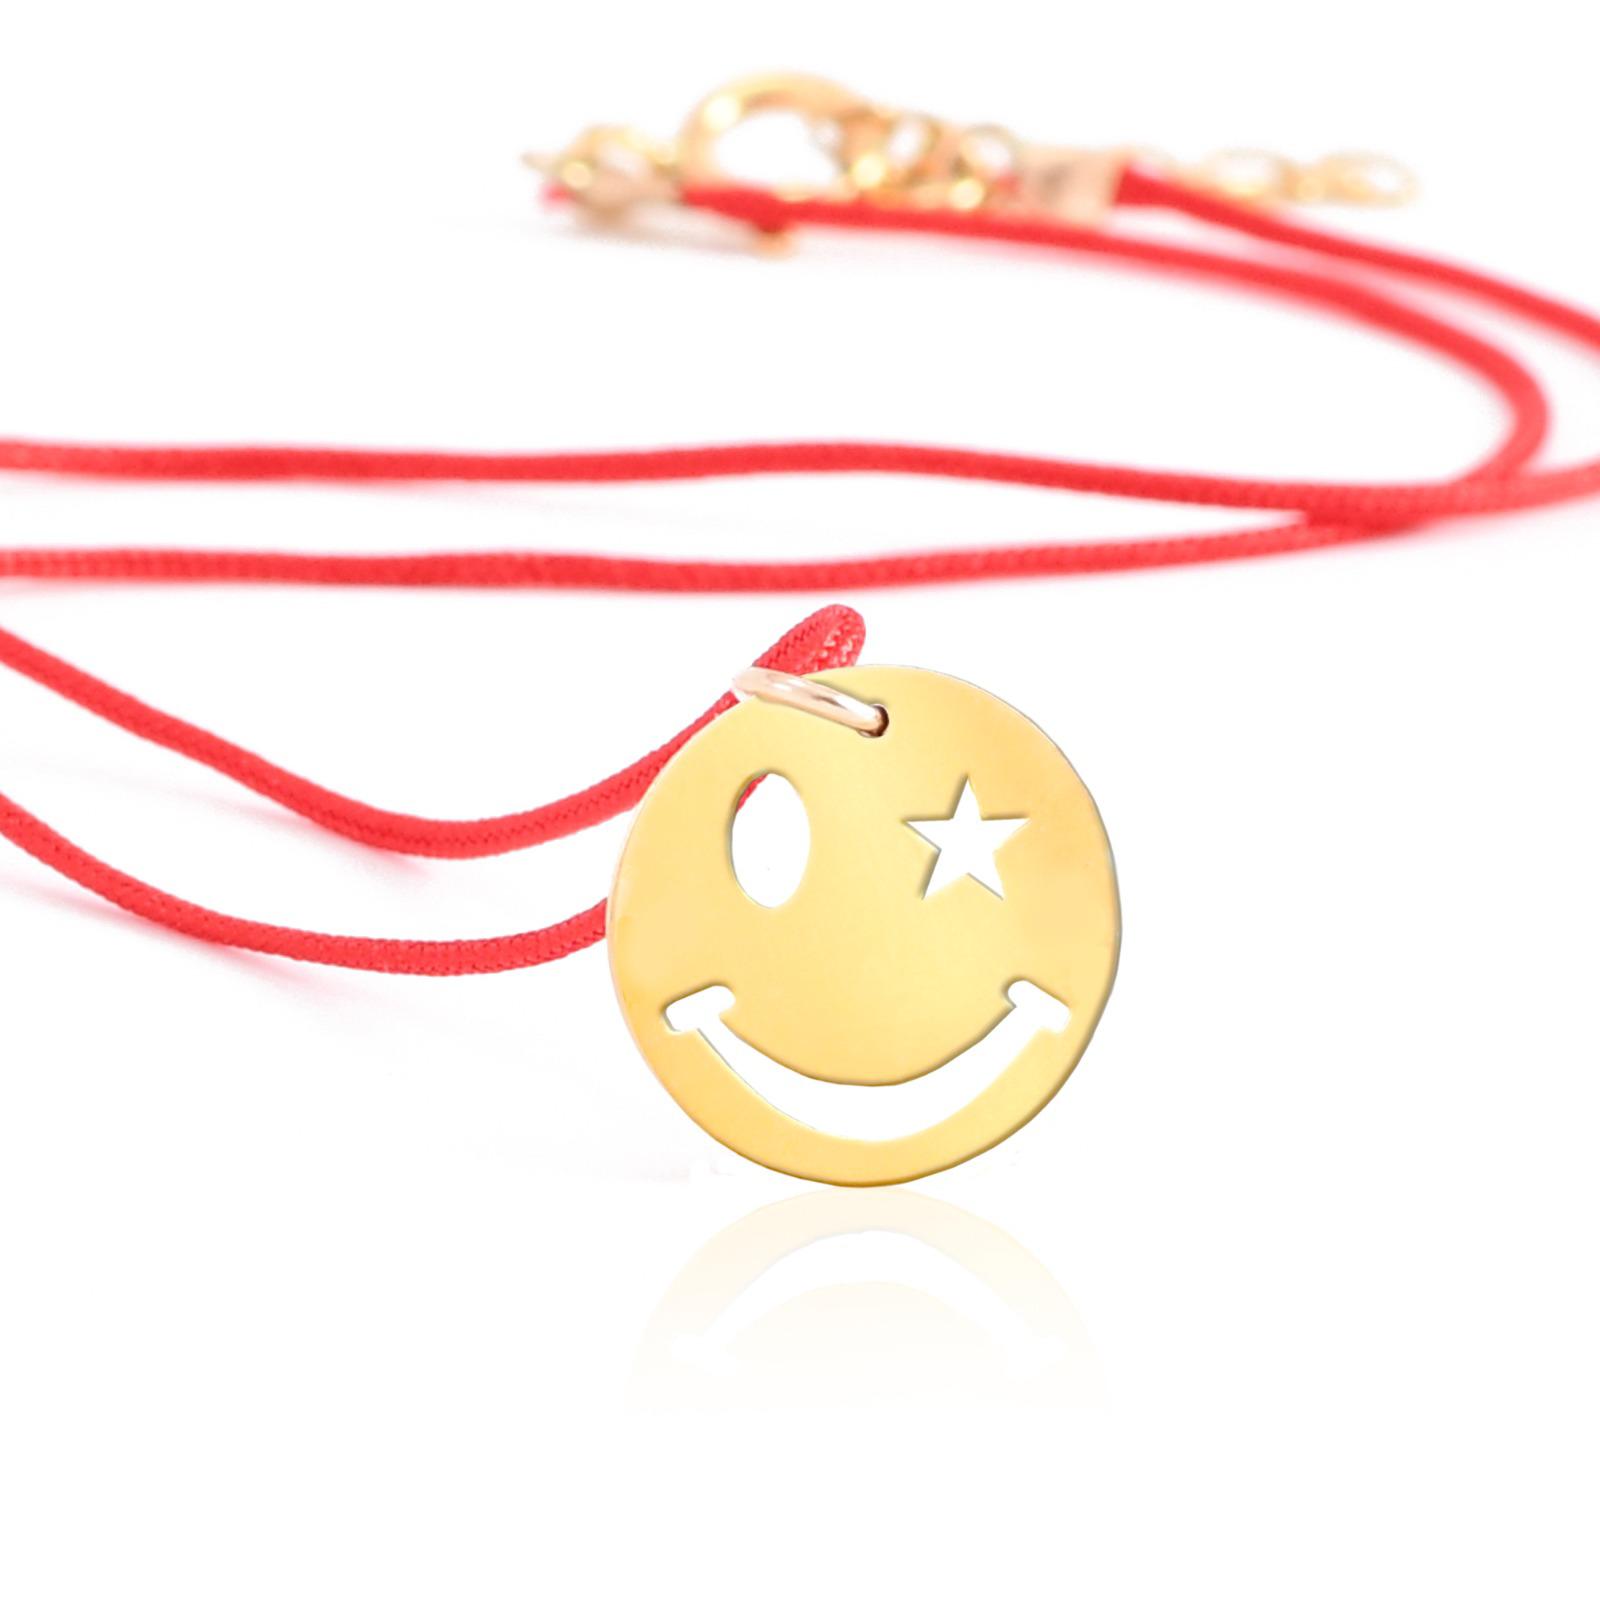 Smiley Miley Red Wire-img